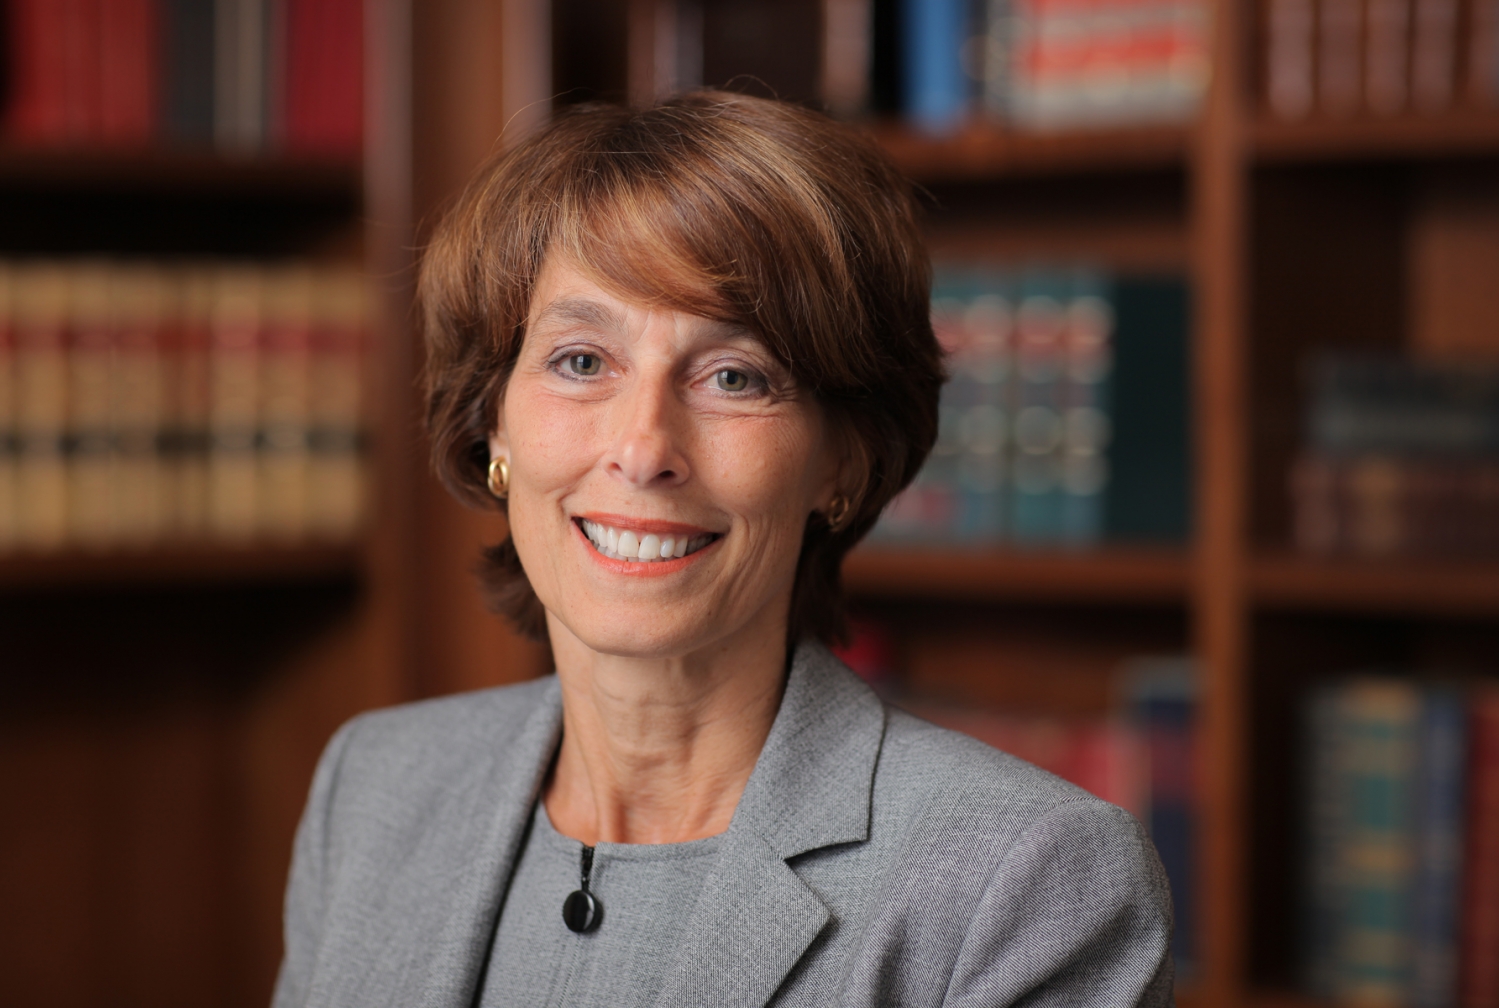 Dr. Laurie Glimcher